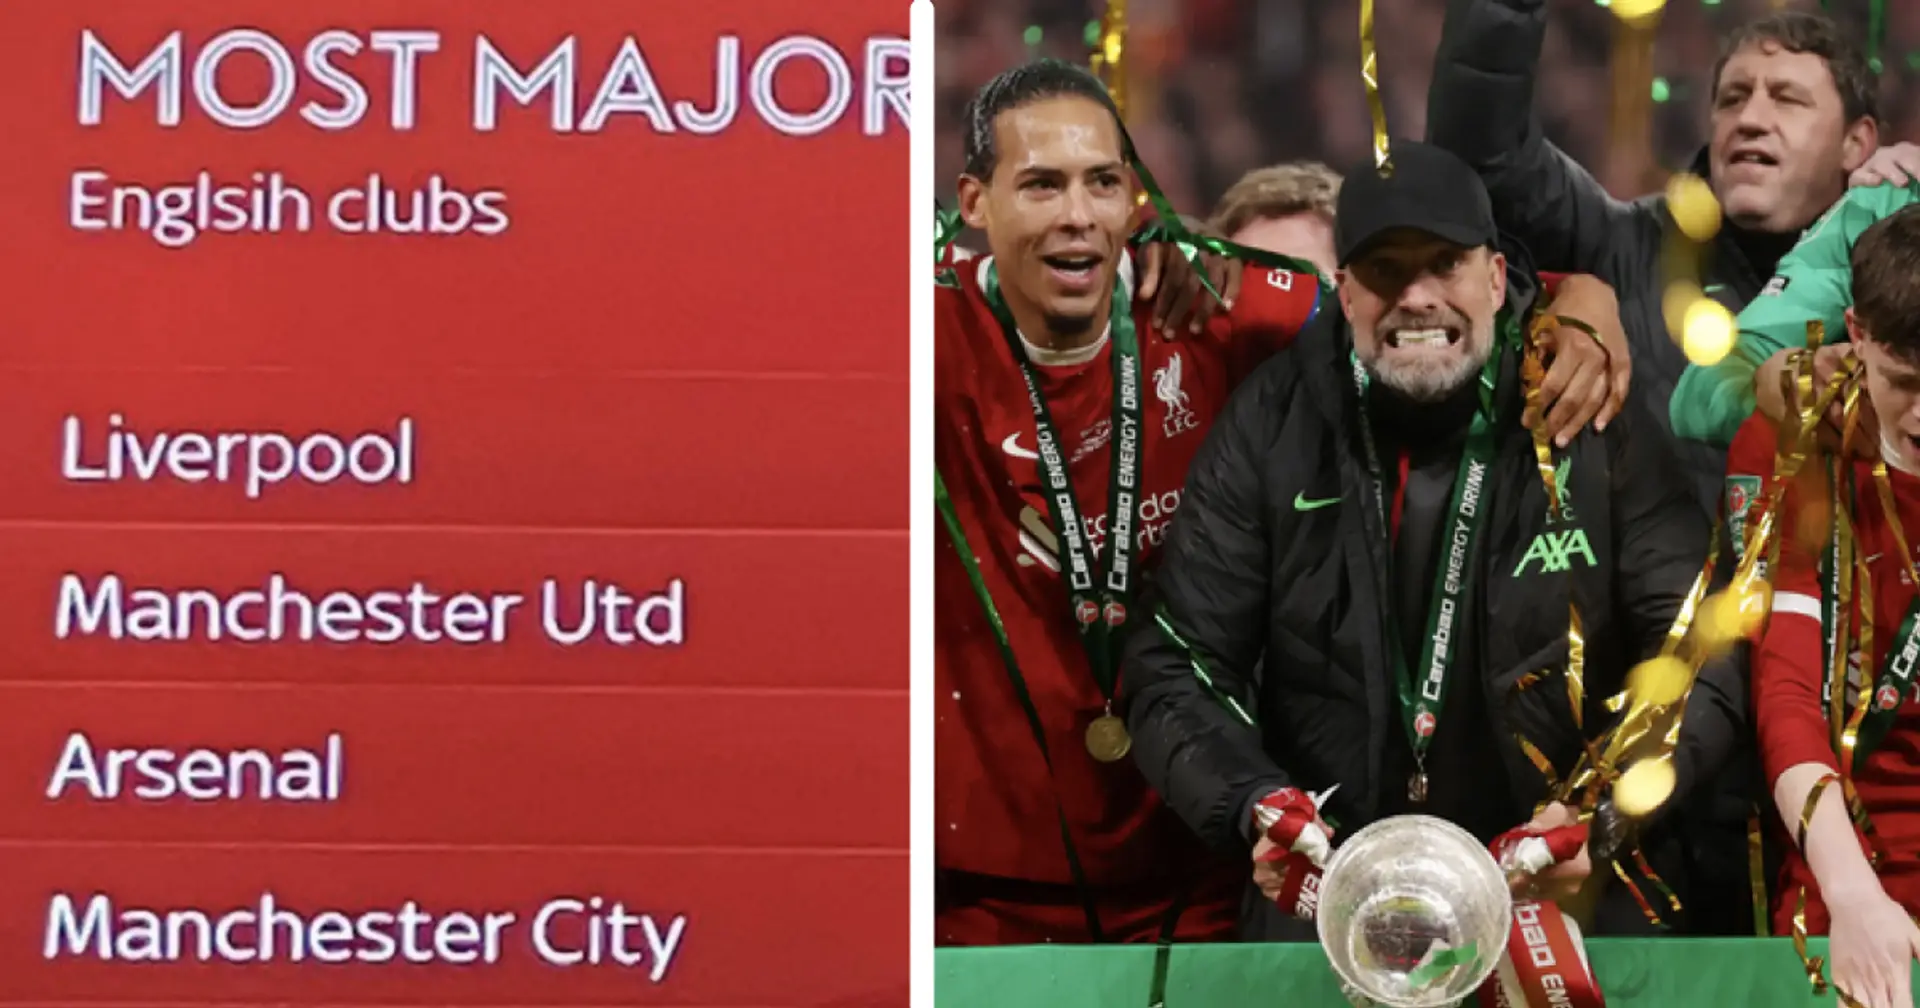 What's the gap between Liverpool and Man United in major trophies won?